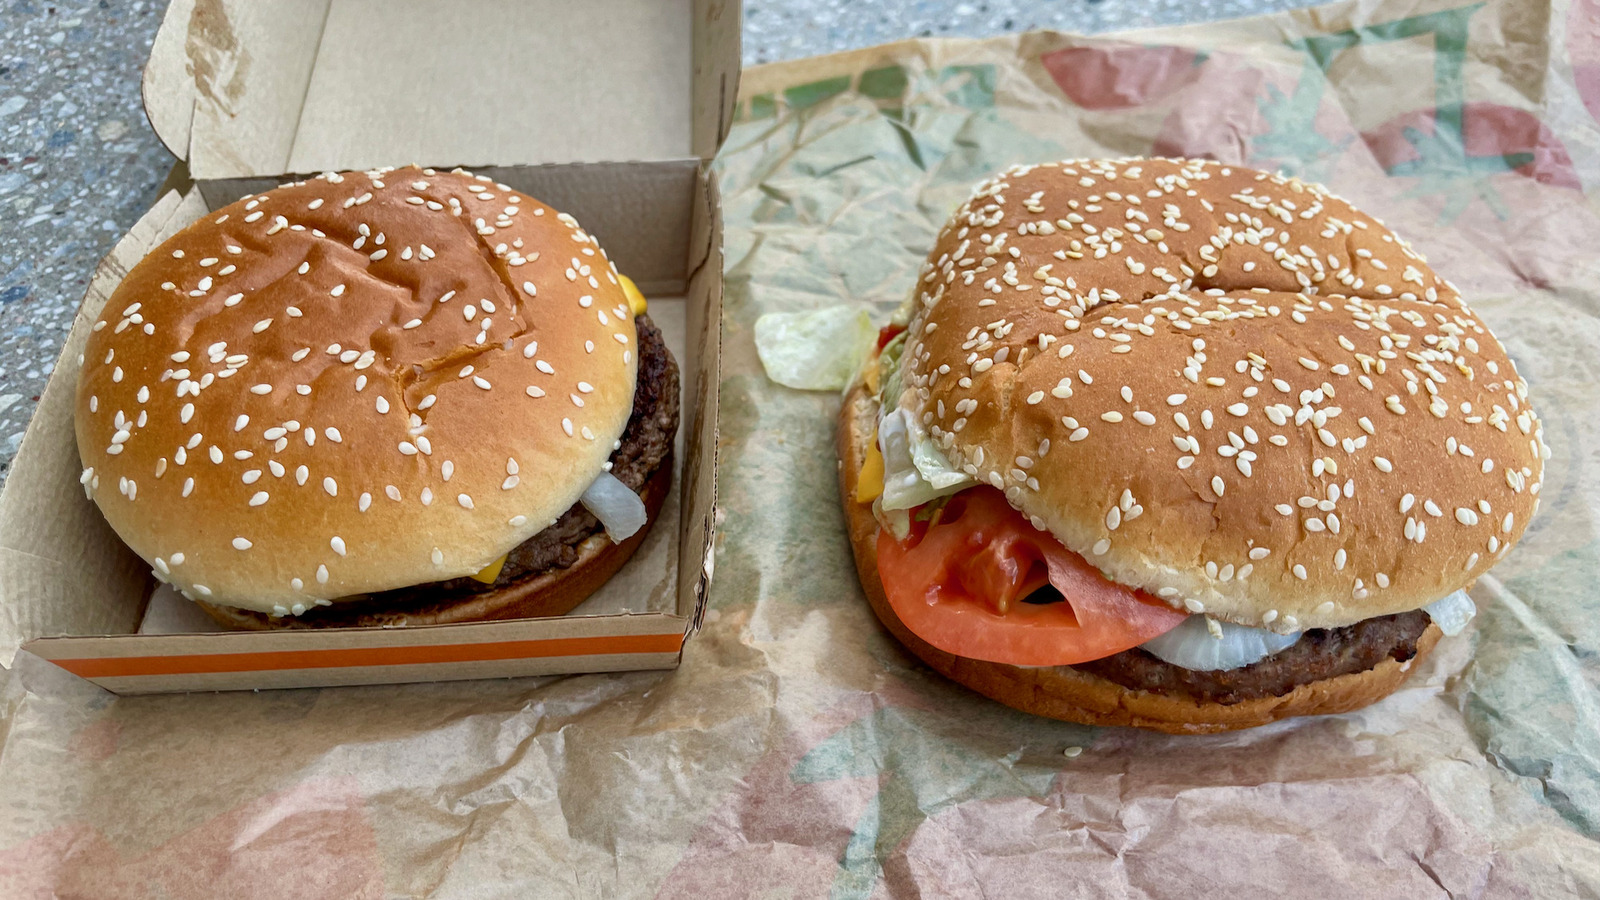 Burger King's Real Meat Burger Is So Extra It Seems Fake